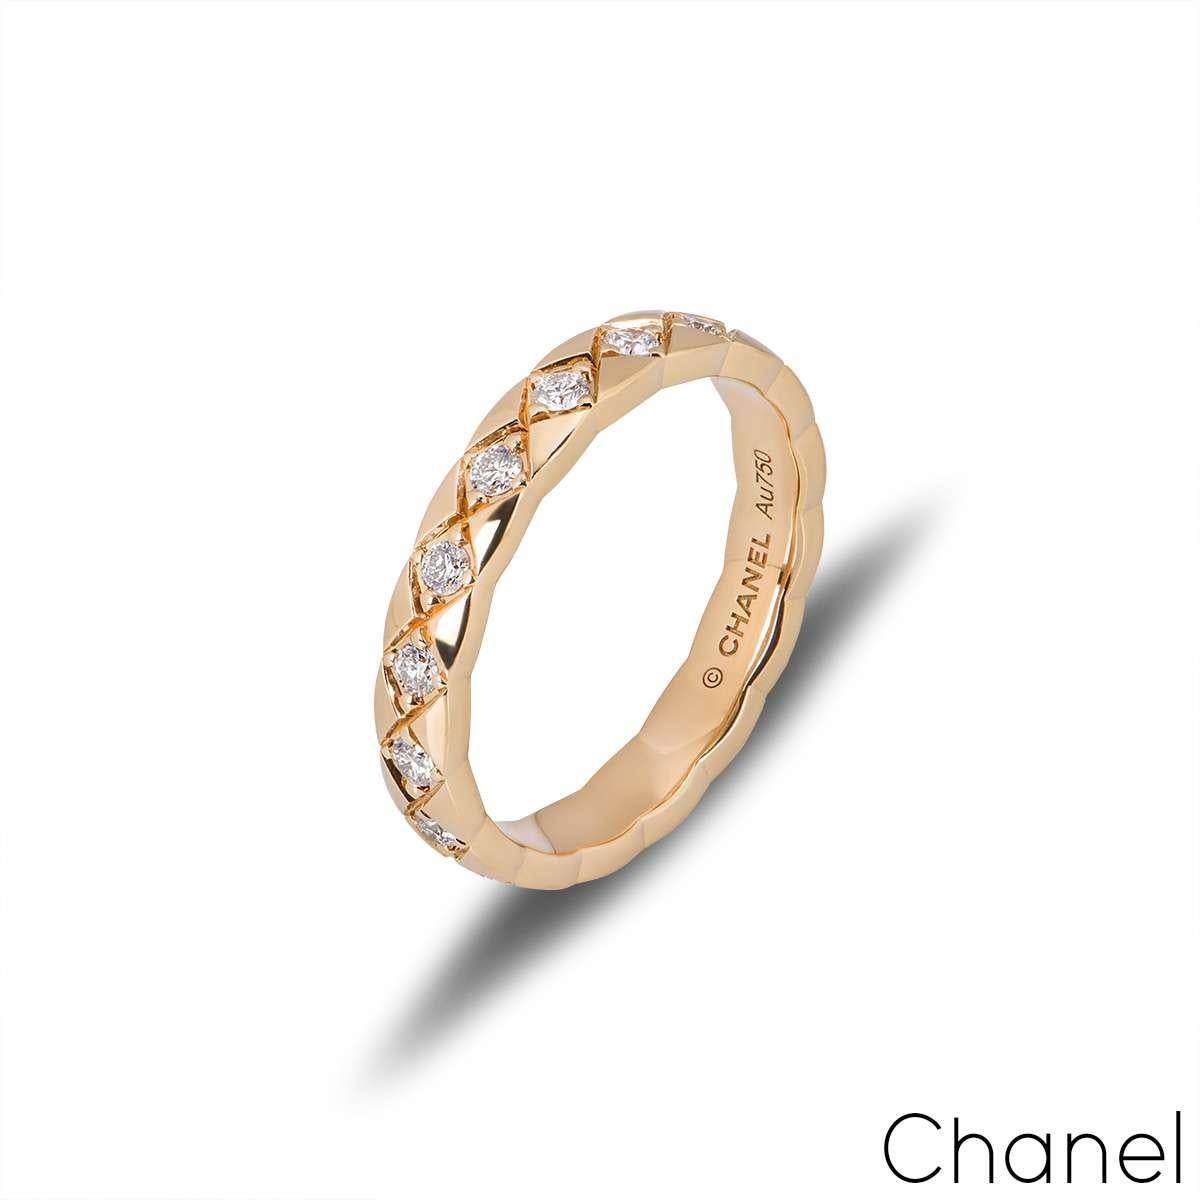 An 18k beige gold ring from the Coco Crush collection by Chanel. The ring features a quilted pattern with round brilliant cut diamonds set throughout the ring. The diamonds have a total weight of 0.37ct. The ring measures 3mm in width, is a size UK